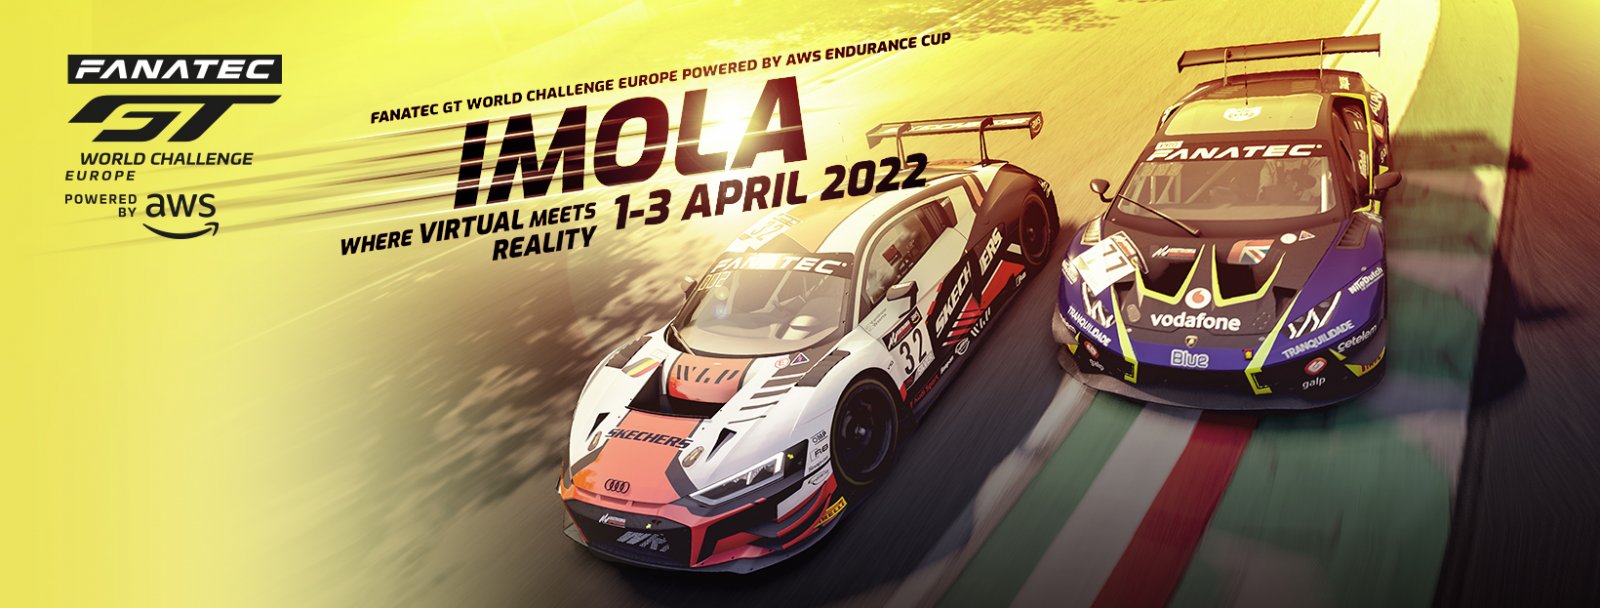 52-car field set for Fanatec GT World Challenge Europe Powered by AWS season opener at Imola